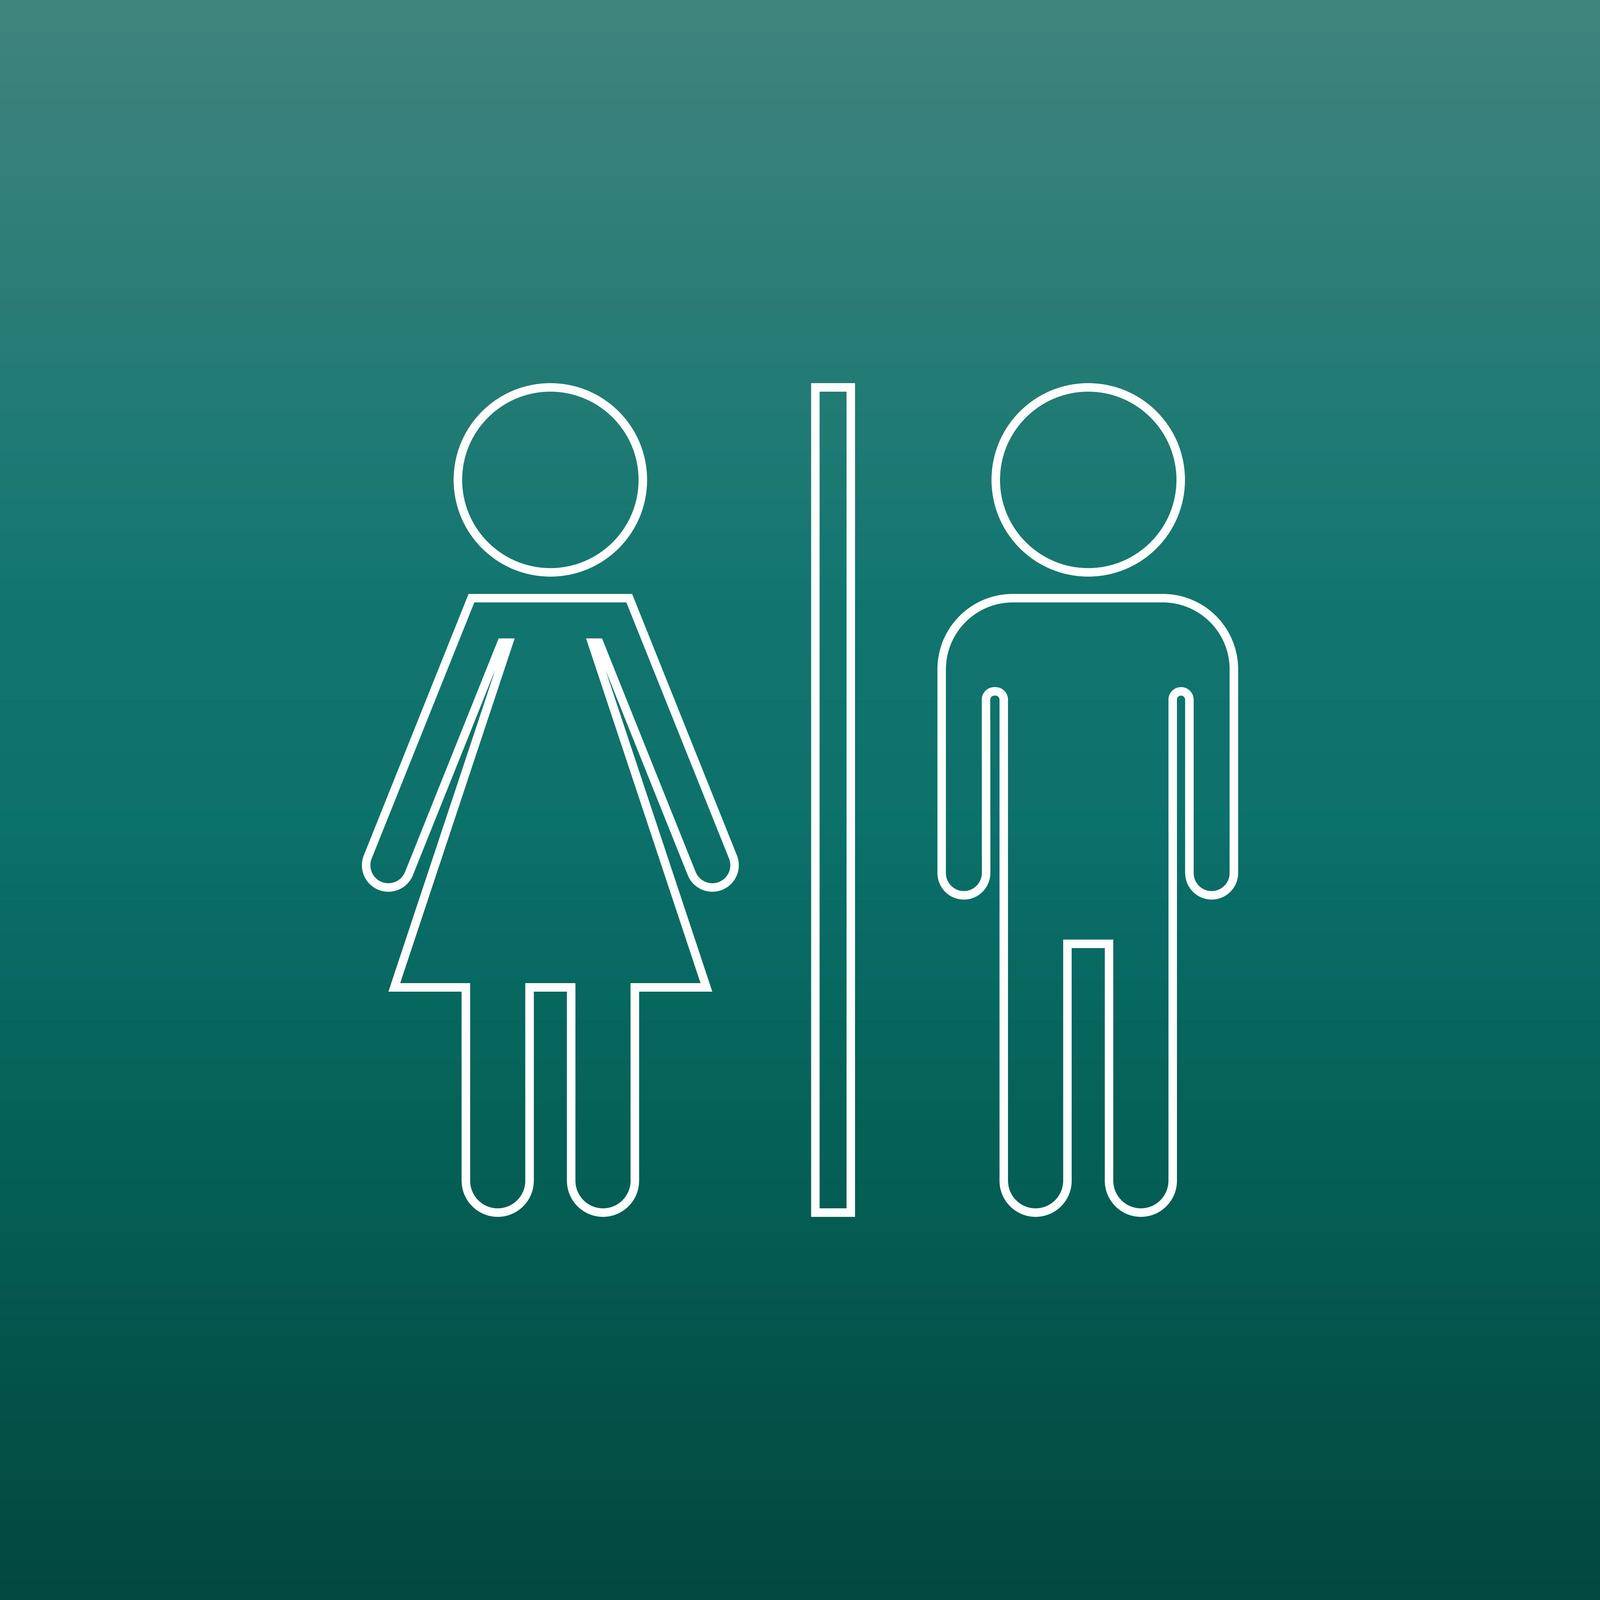 WC, toilet line vector icon . Men and women sign for restroom on green background.